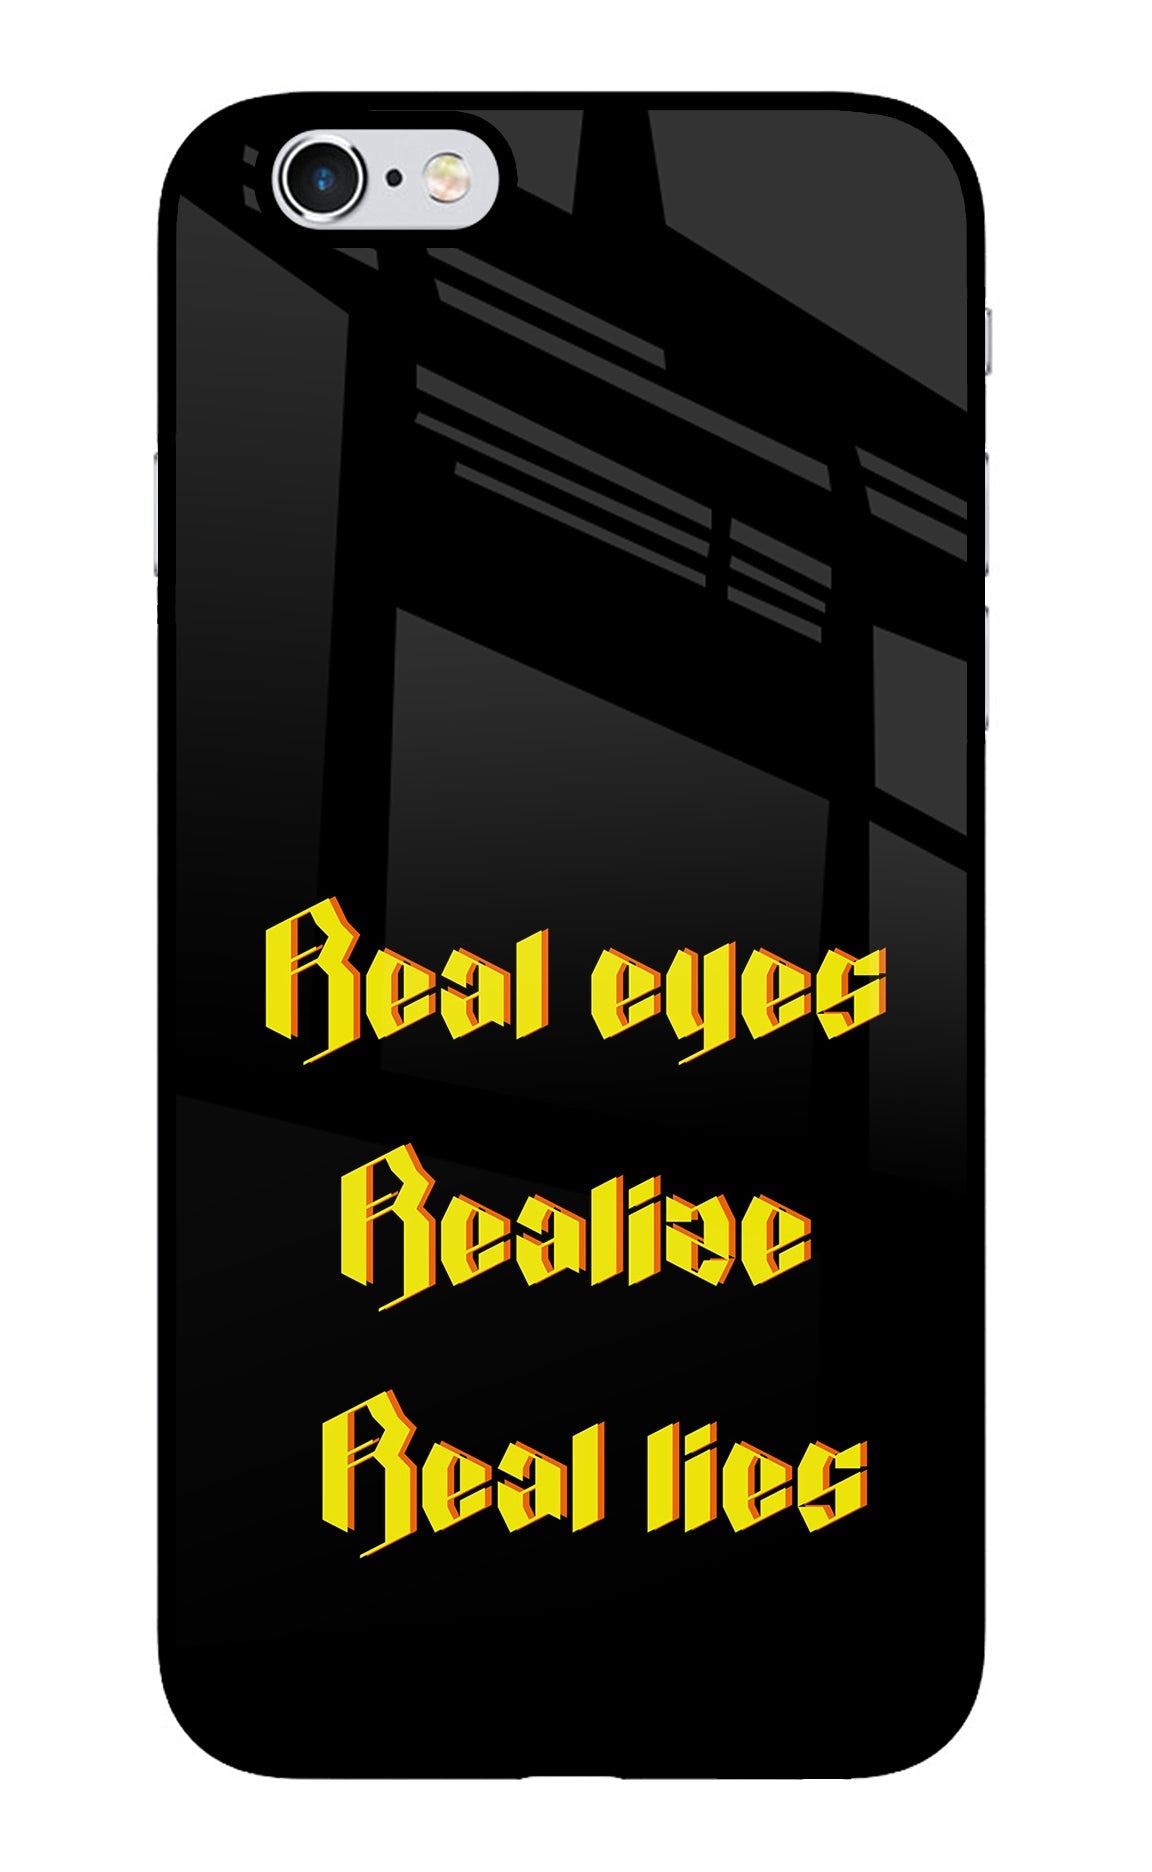 Real Eyes Realize Real Lies iPhone 6/6s Back Cover